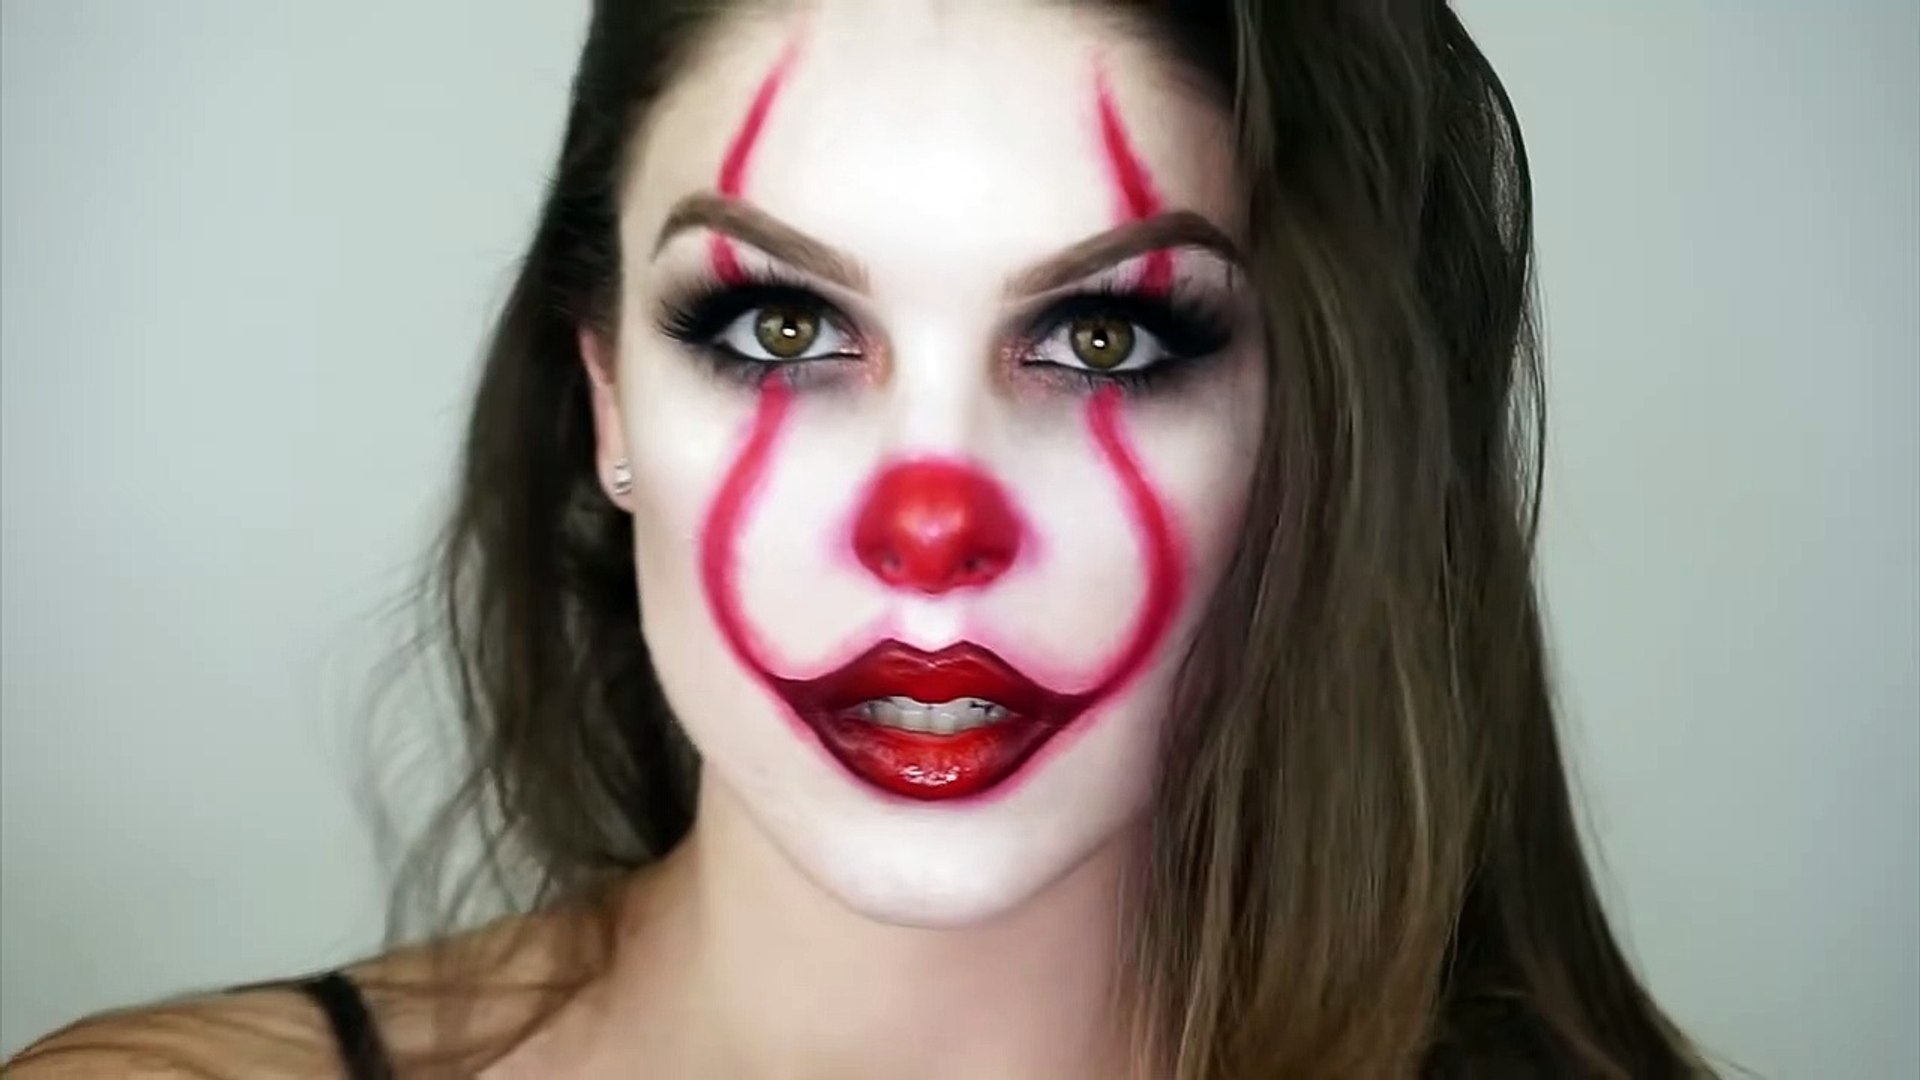 Cute Clown Makeup Made Simple: 5 Tips for a Perfectly Polished Look!